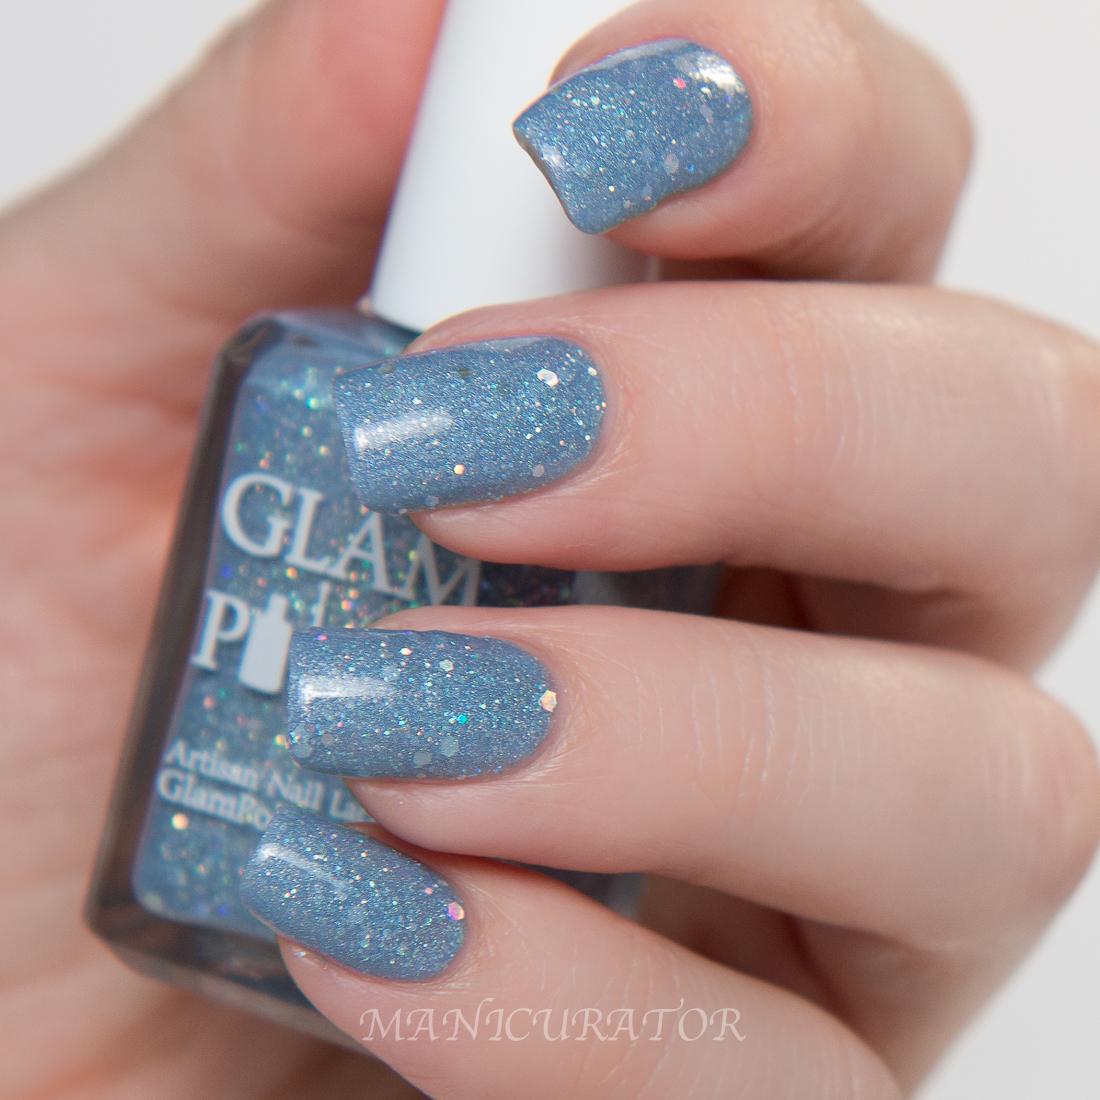 Glam-Cast-a-Spell-Spellbound